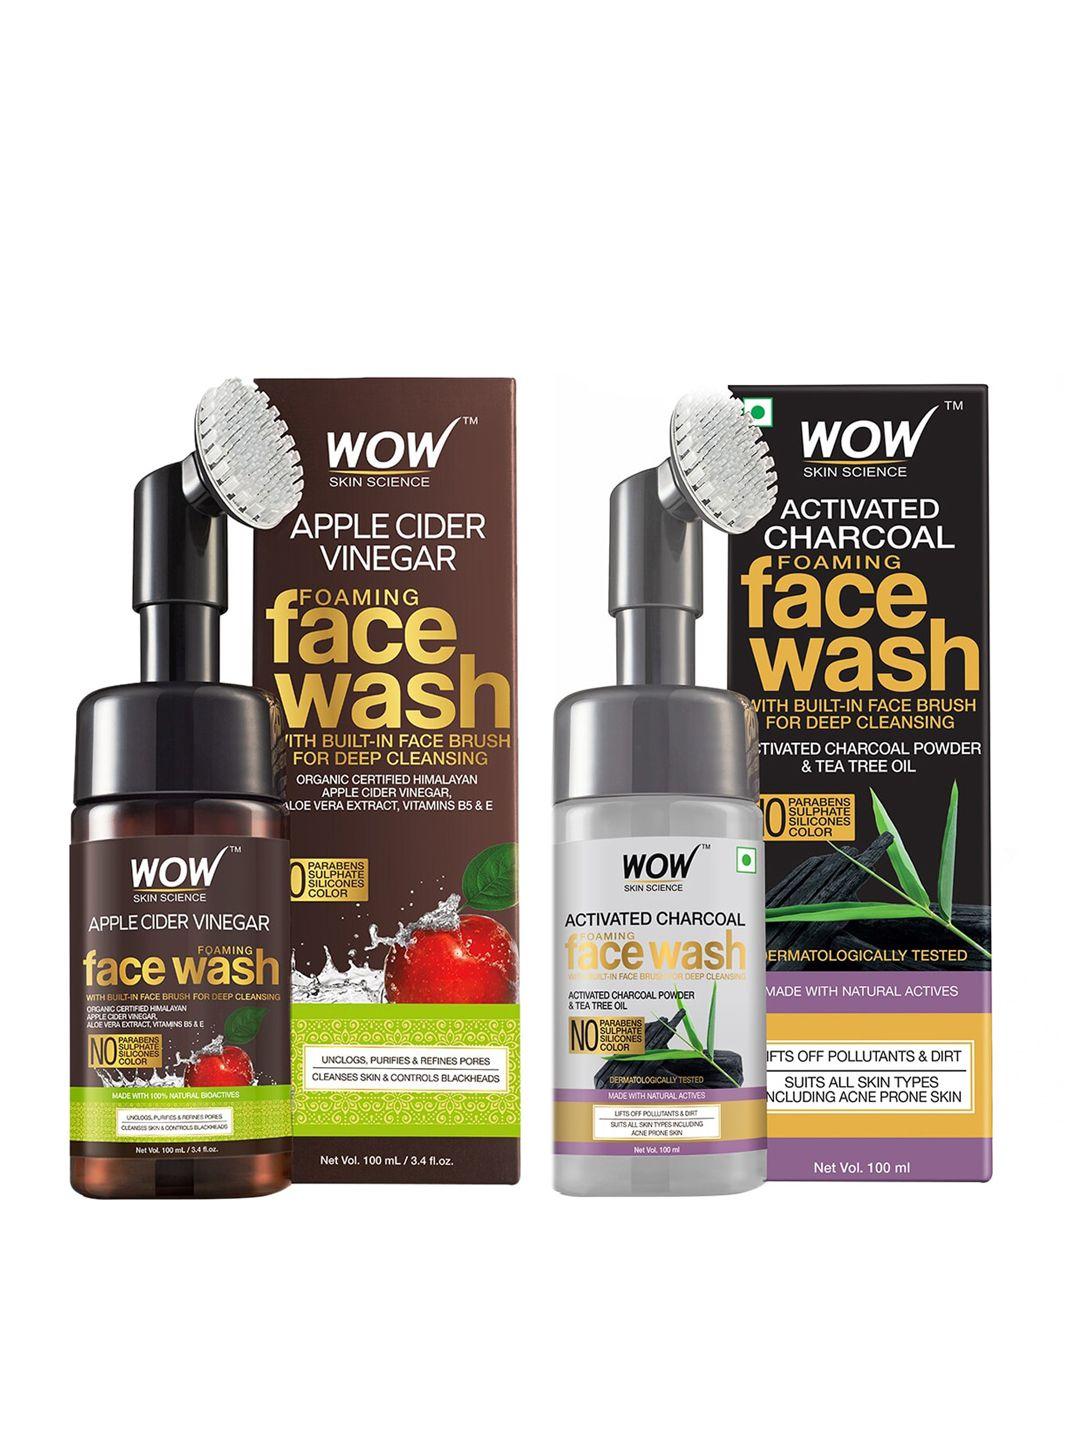 wow skin science unisex set of 2 foaming face washes